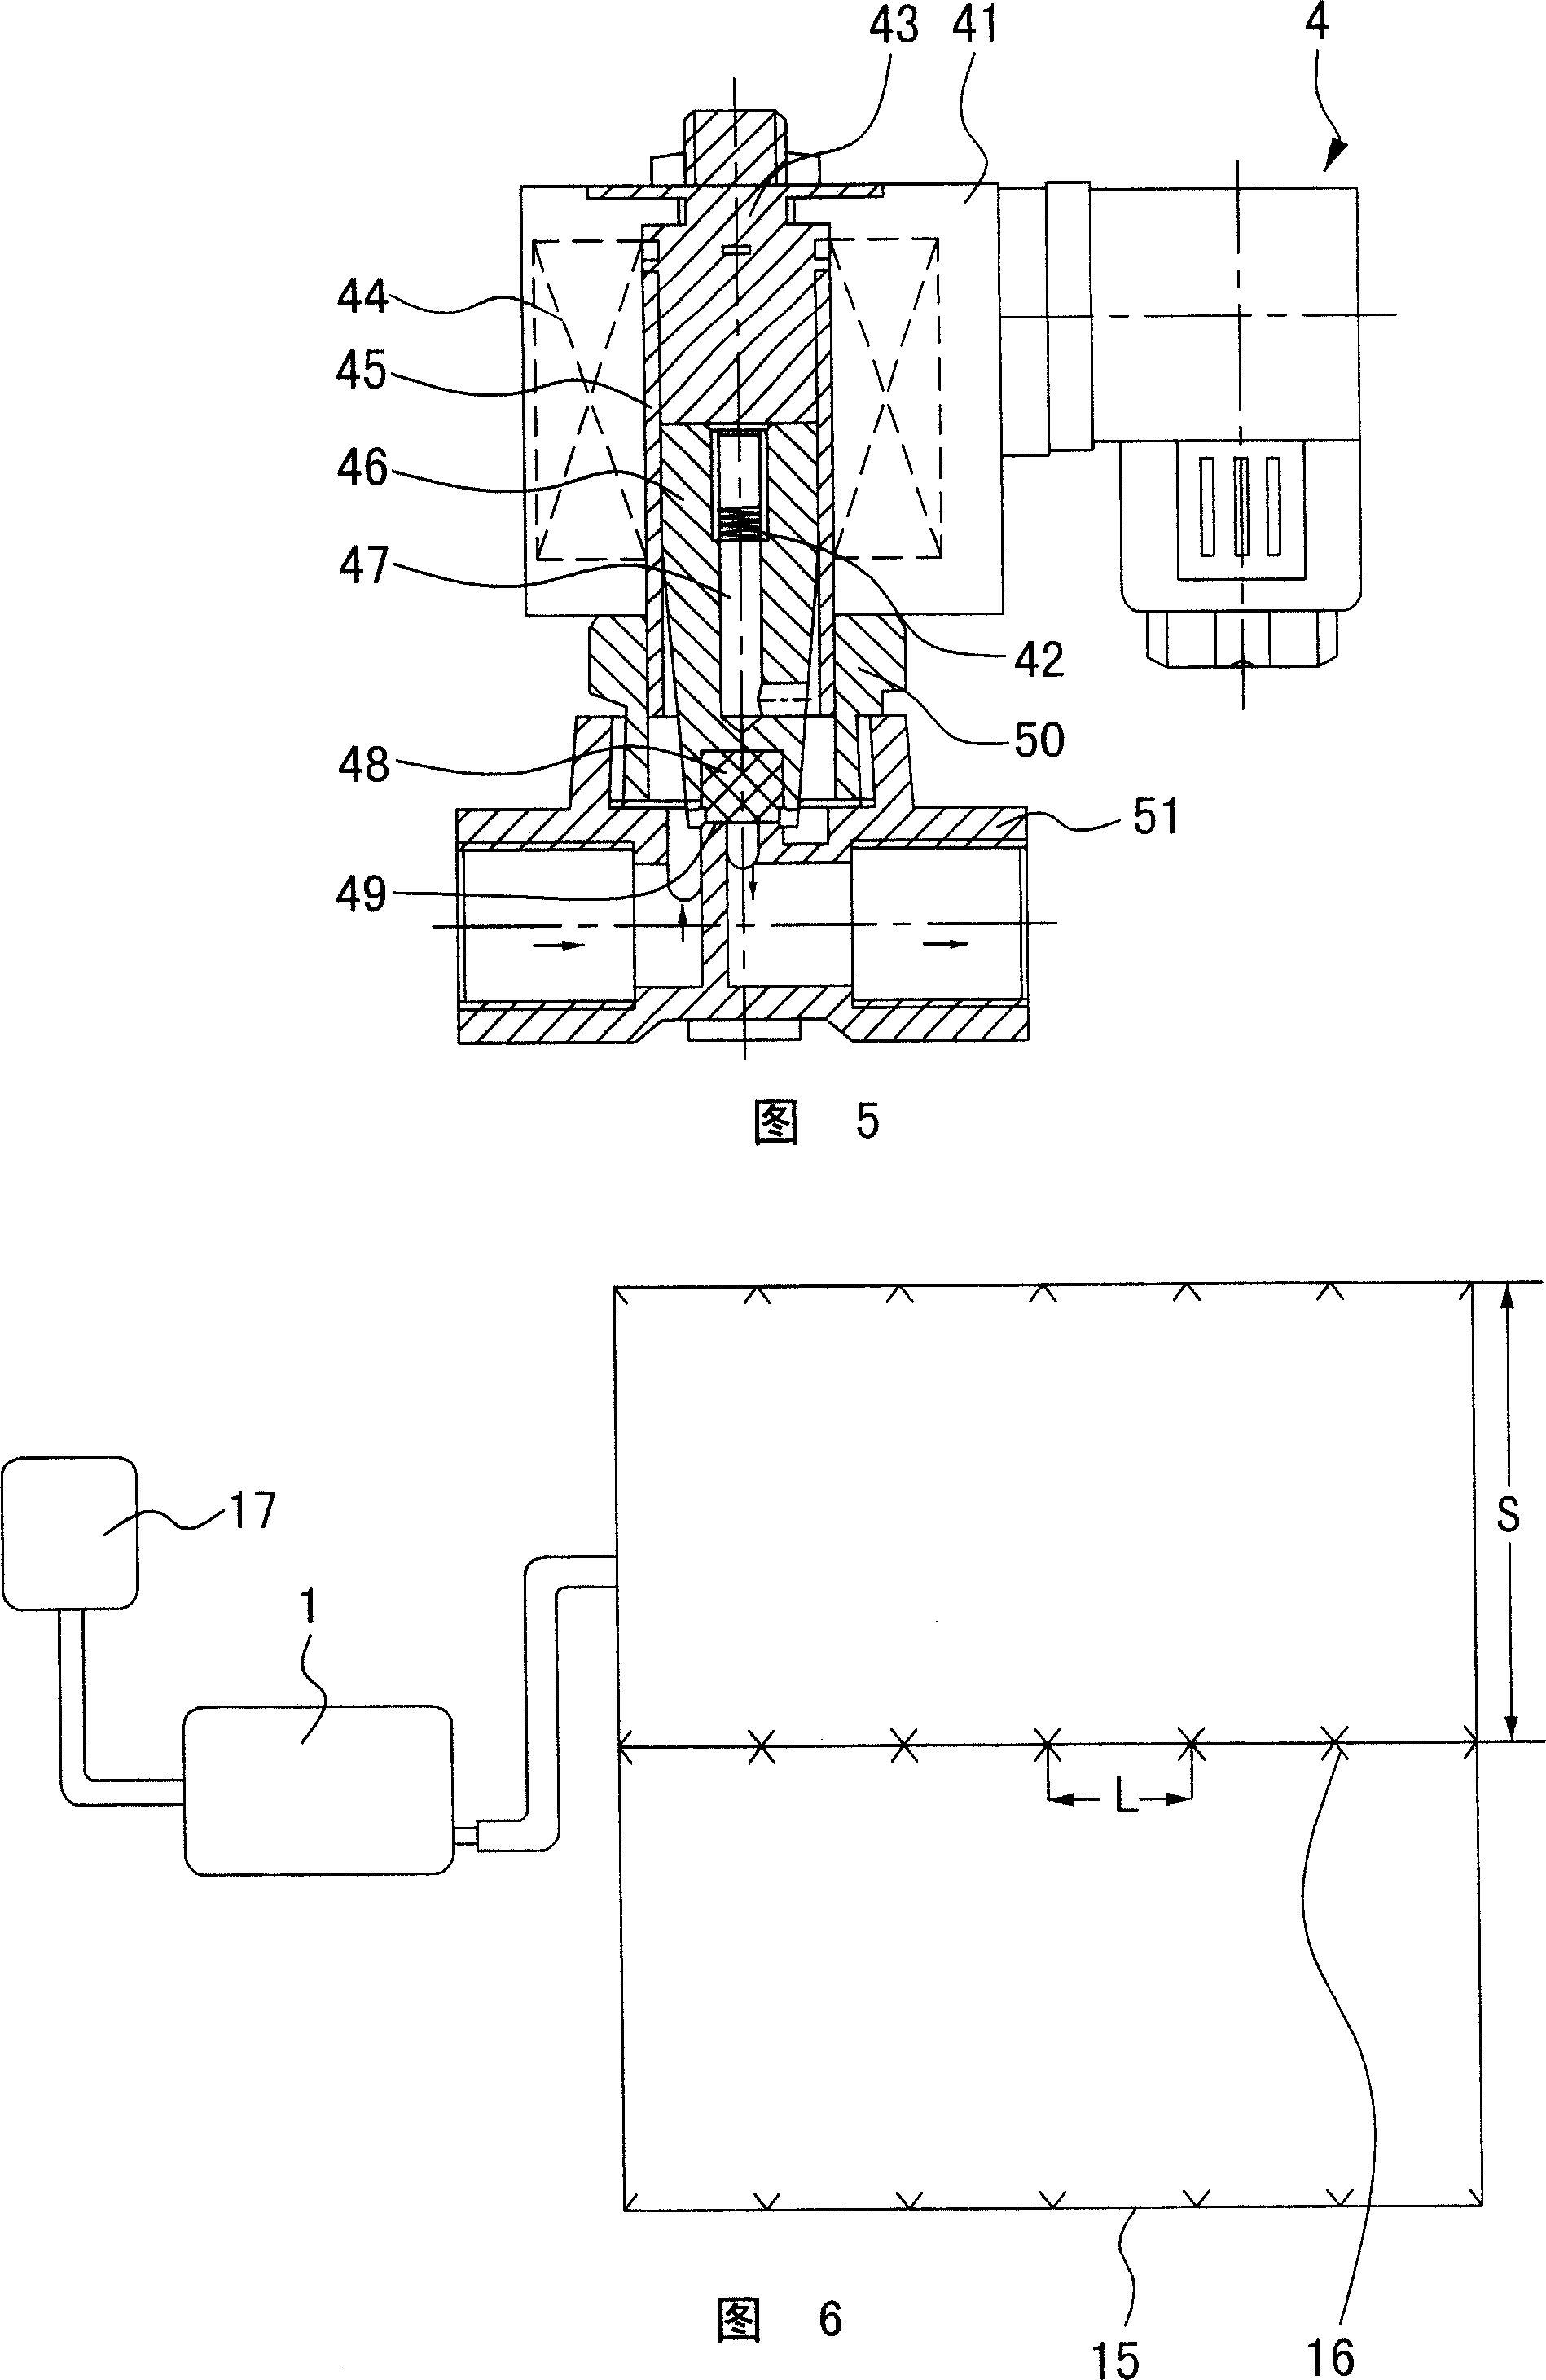 Central-controlled system spraying machine